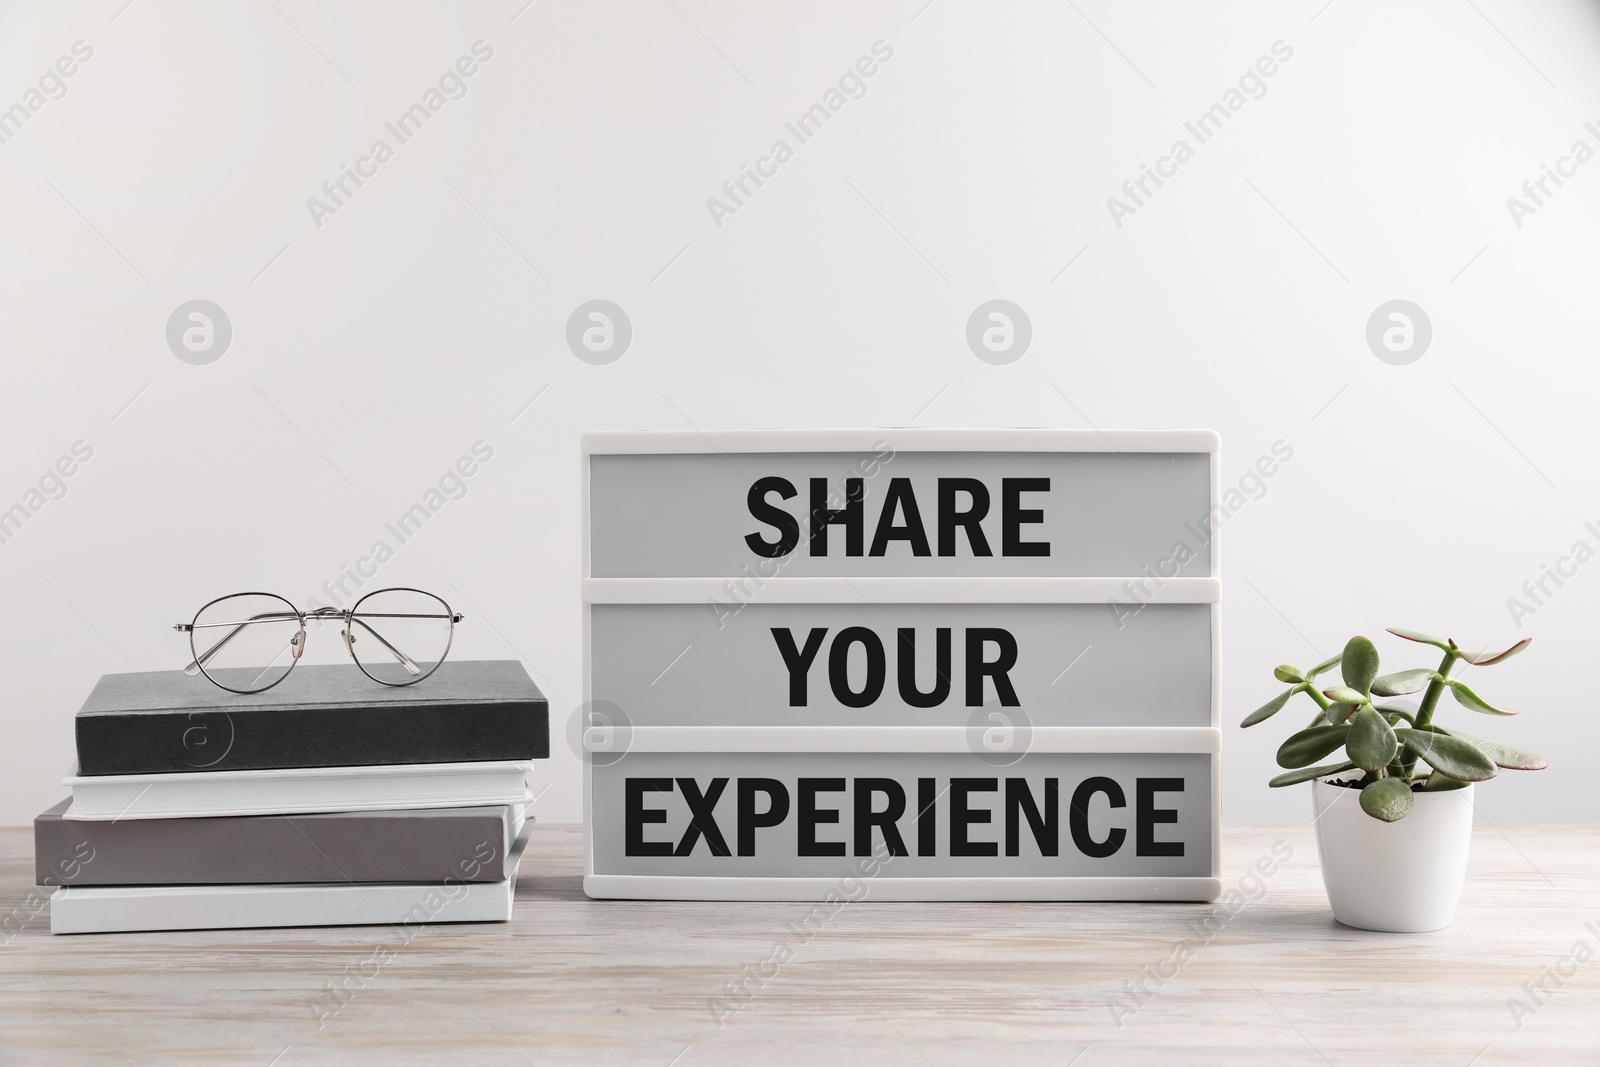 Image of Motivational phrase. Letter board with text Share Your Experience, books, glasses and houseplant on wooden table